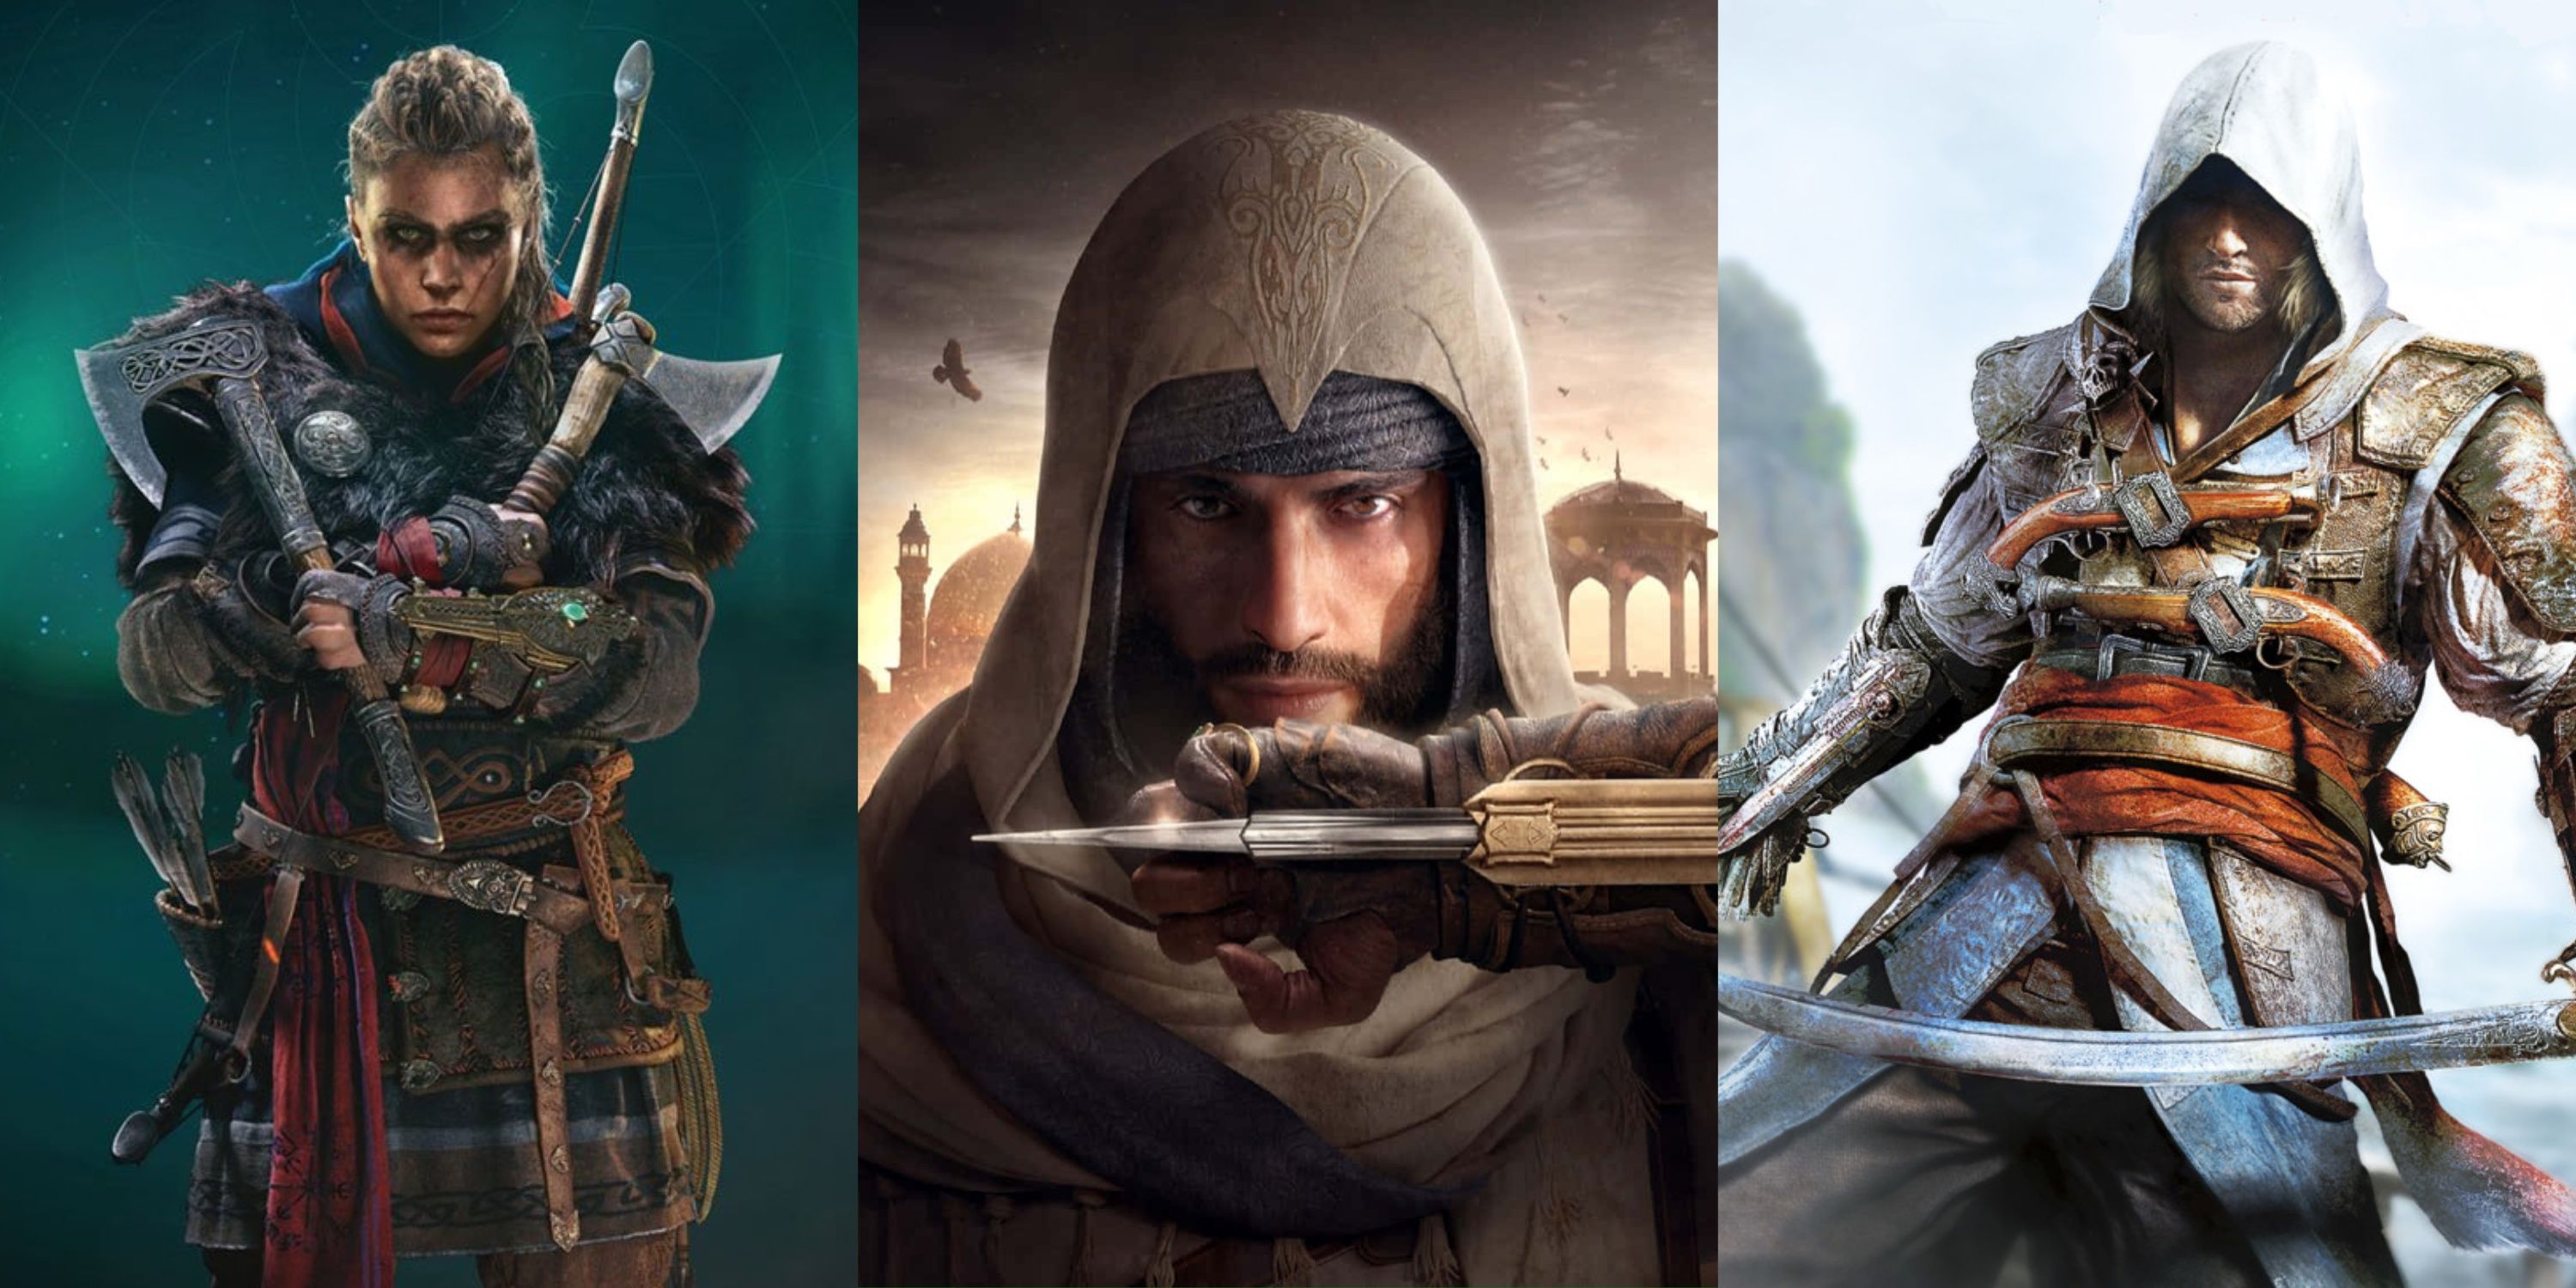 Split image of Assassin's Creed Protagonists Eivor, Basim, and Edward Kenway